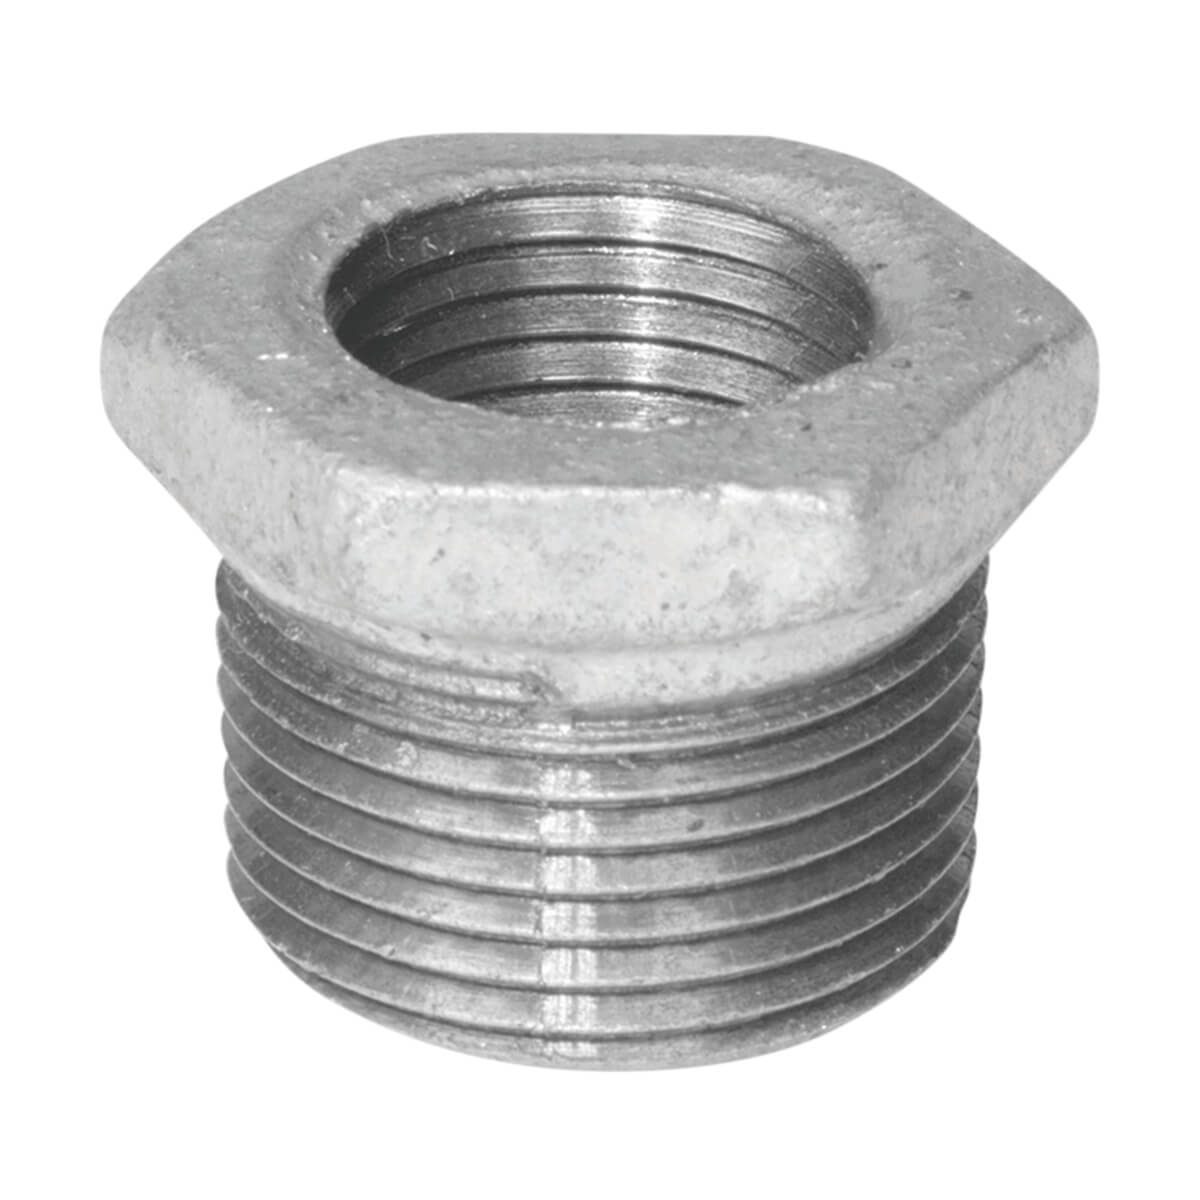 Fitting Galvanized Iron Hex Bushing - 2-in x 3/4-in